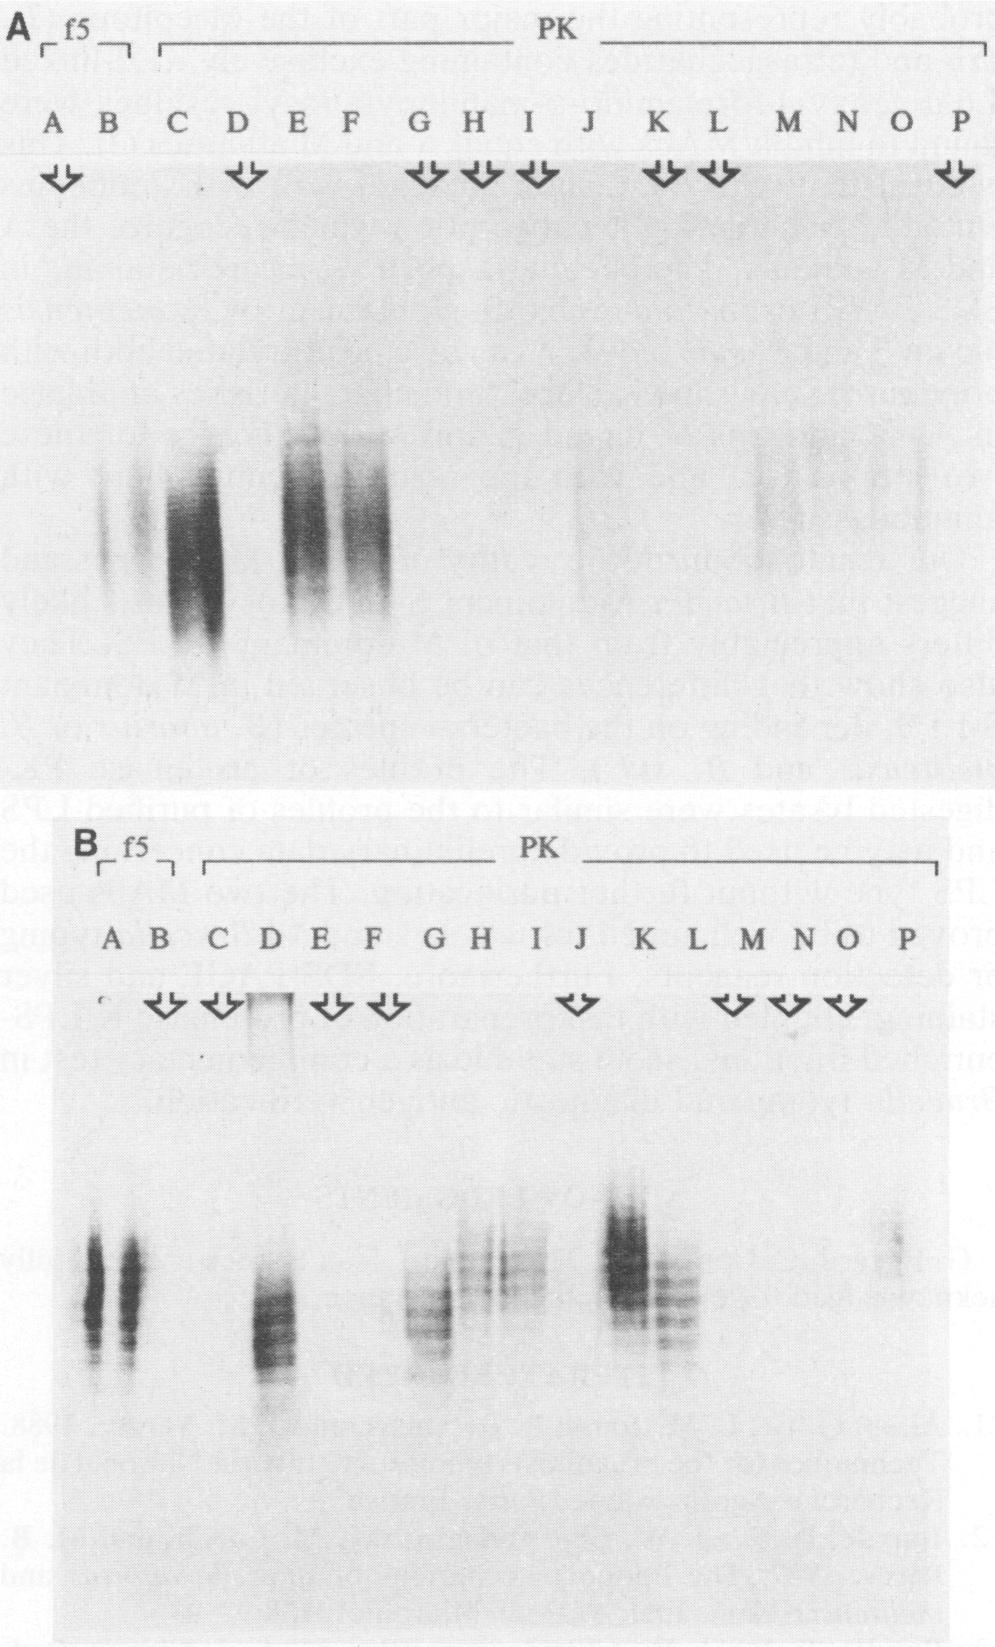 LPS-coated latex agglutination inhibition are consistent with the early proposal of Wilson and Miles (27) and practical results currently observed in standard biotyping of brucellae (Table 1) (1).